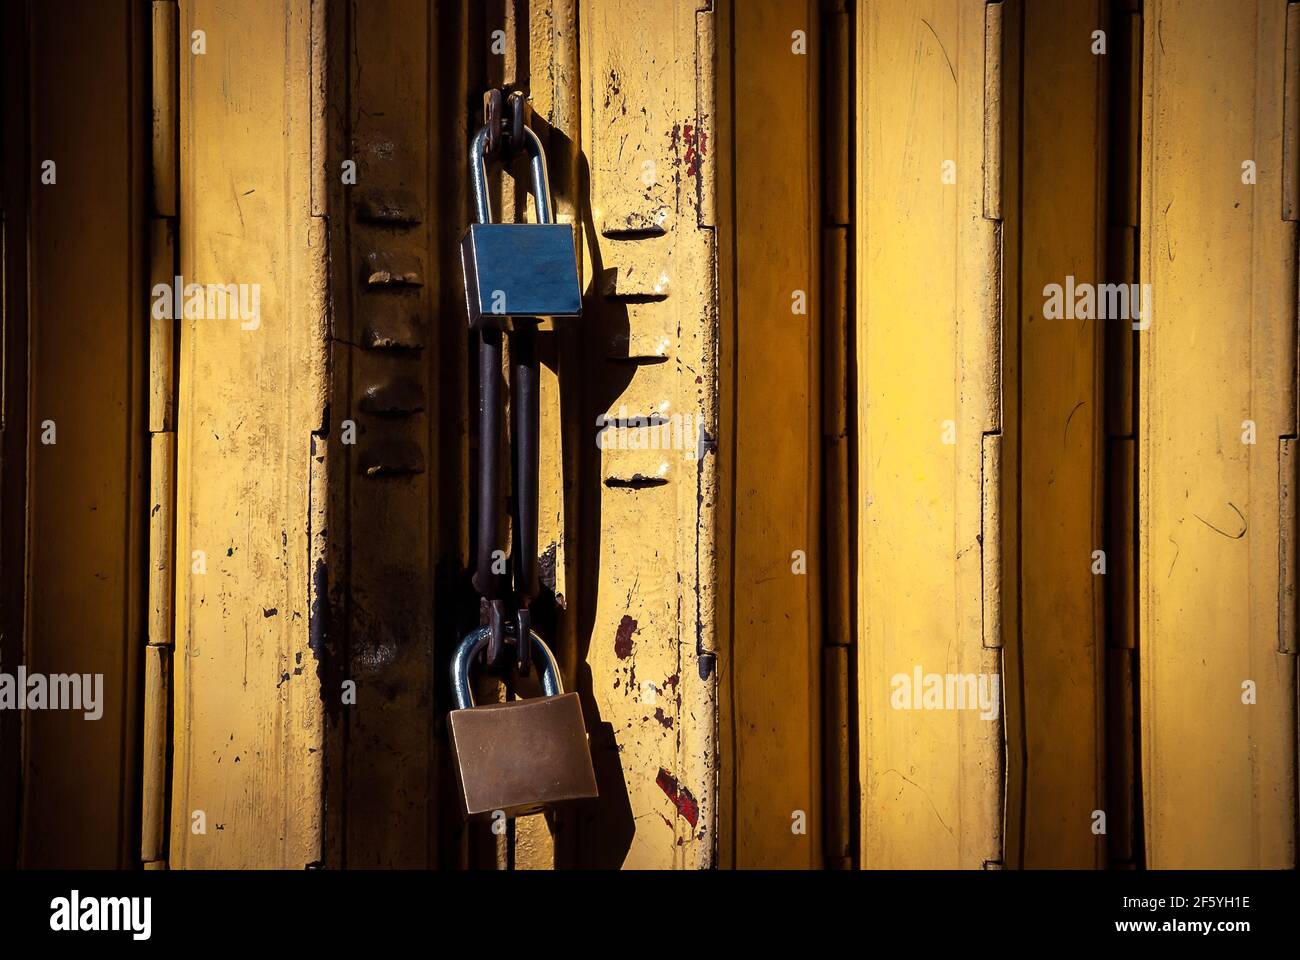 A business establishment closed by yellow gate and secured by two padlocks. Close up shot taken early in the morning. Stock Photo